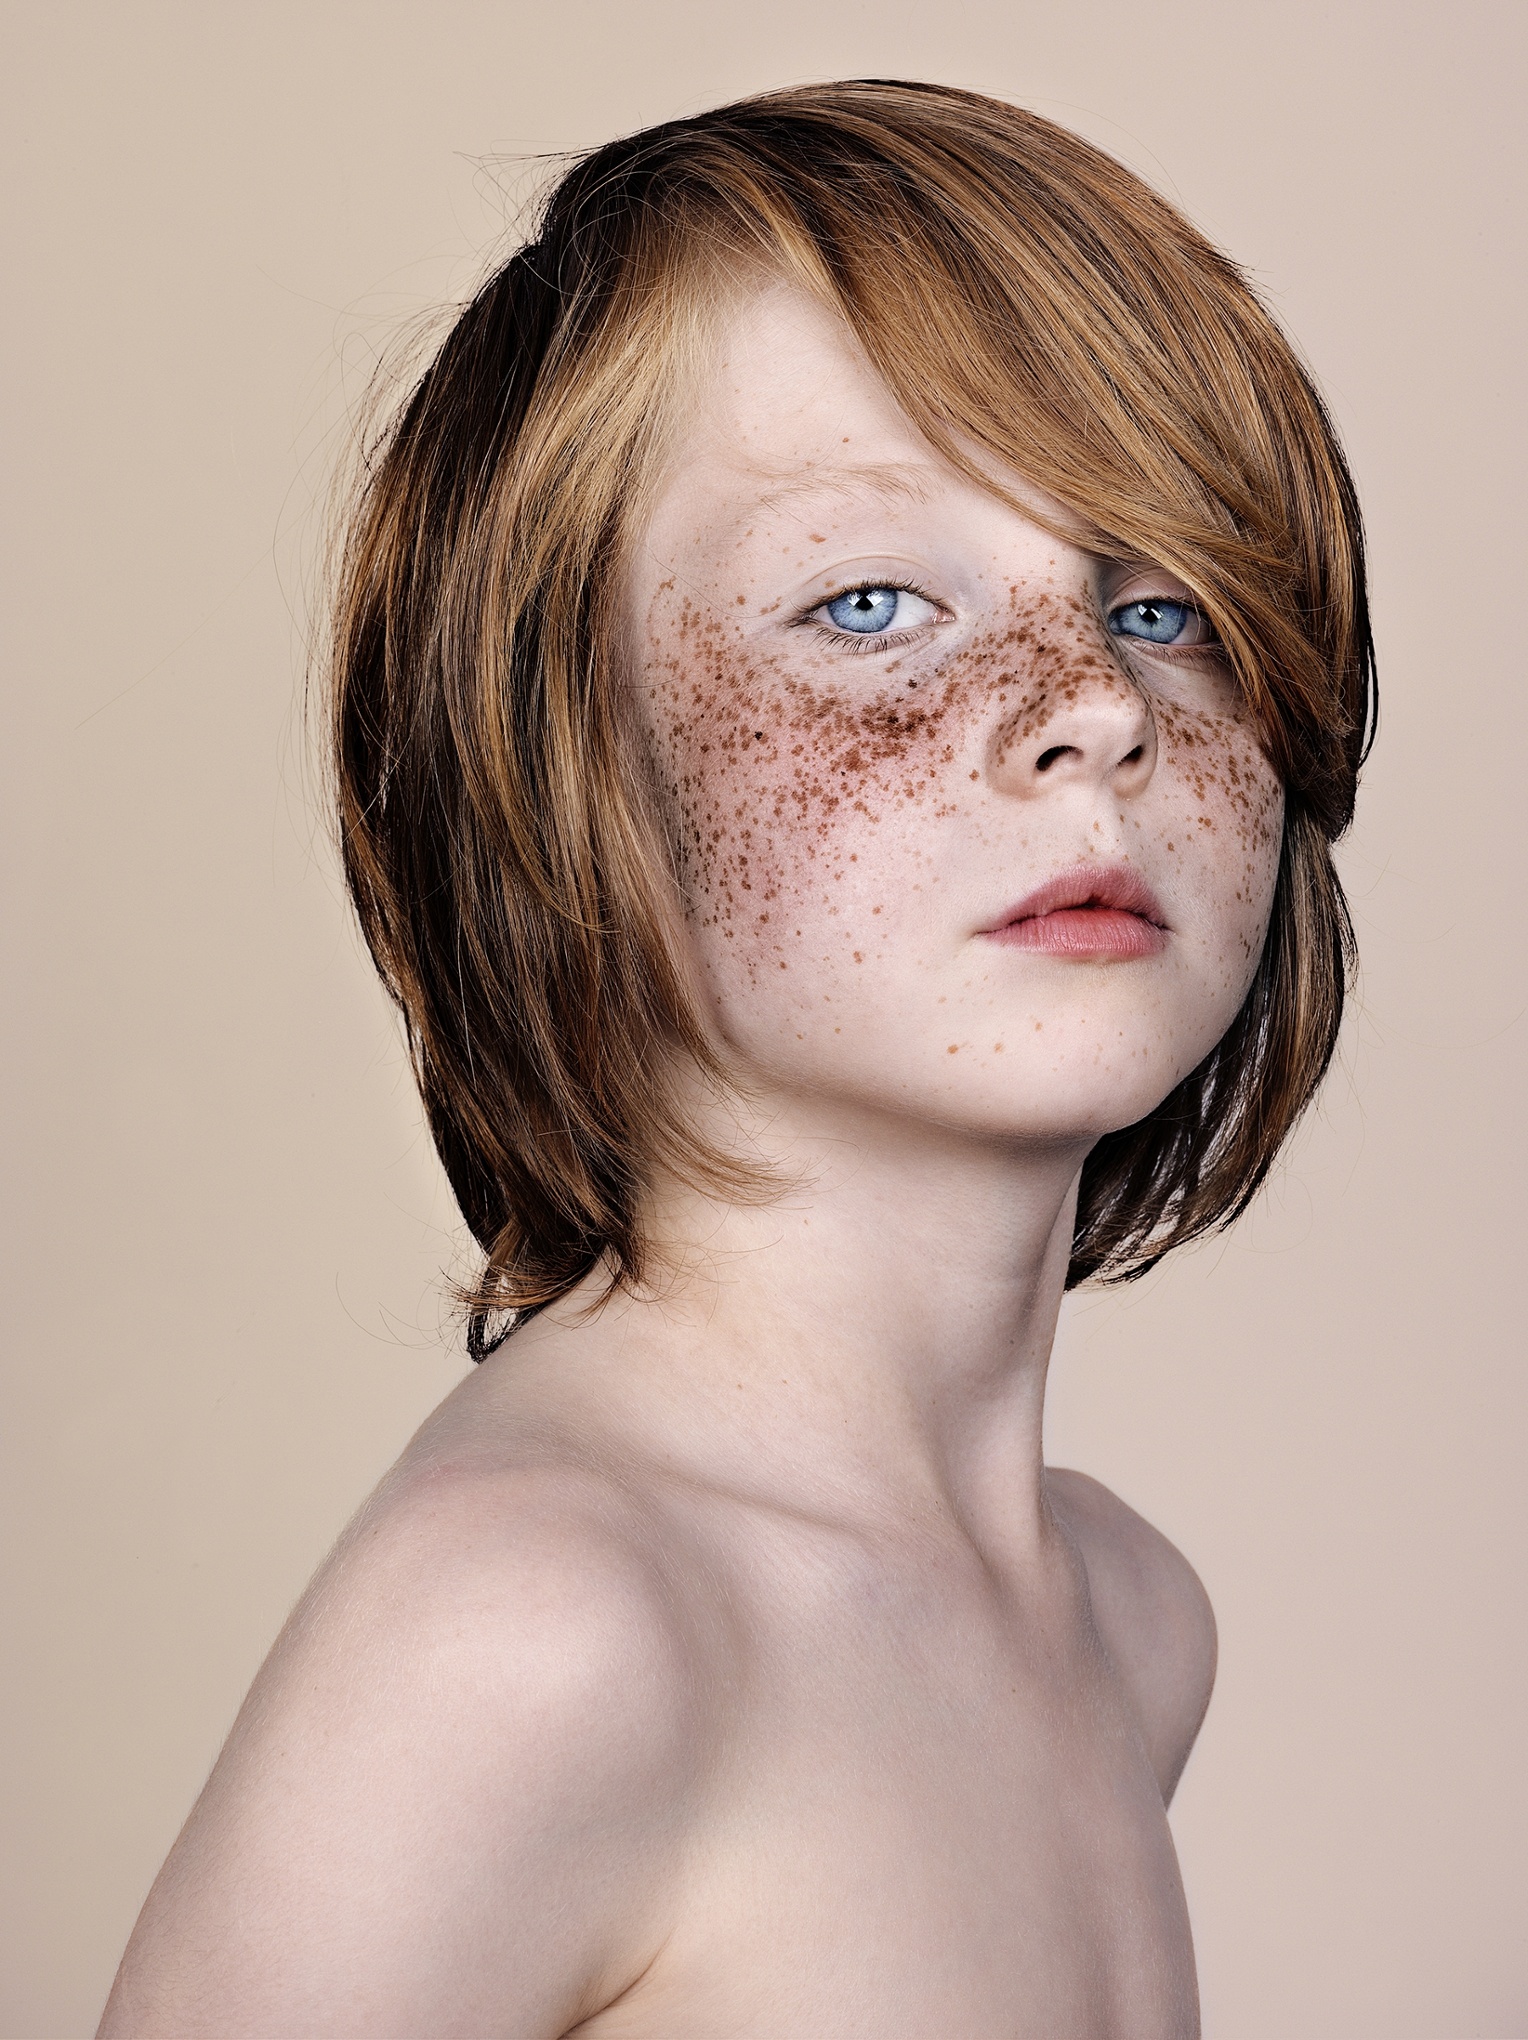 Freckles Brock Elbanks Striking Portraits – In Pictures Art And